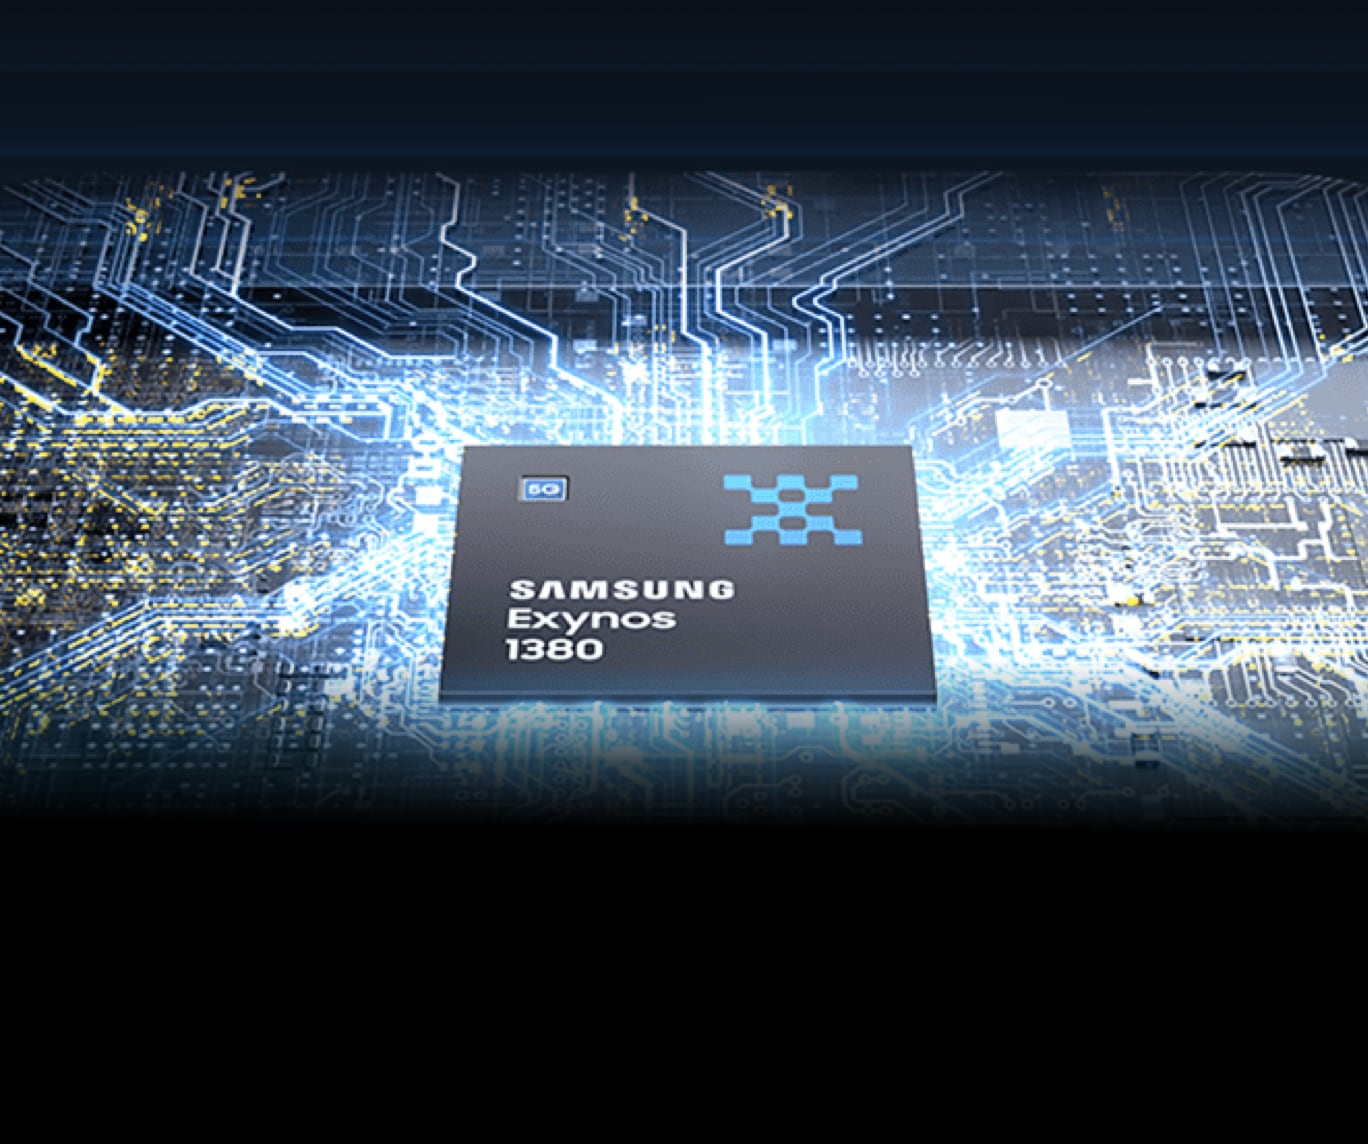 This is an image of Samsung Exynos 1380.